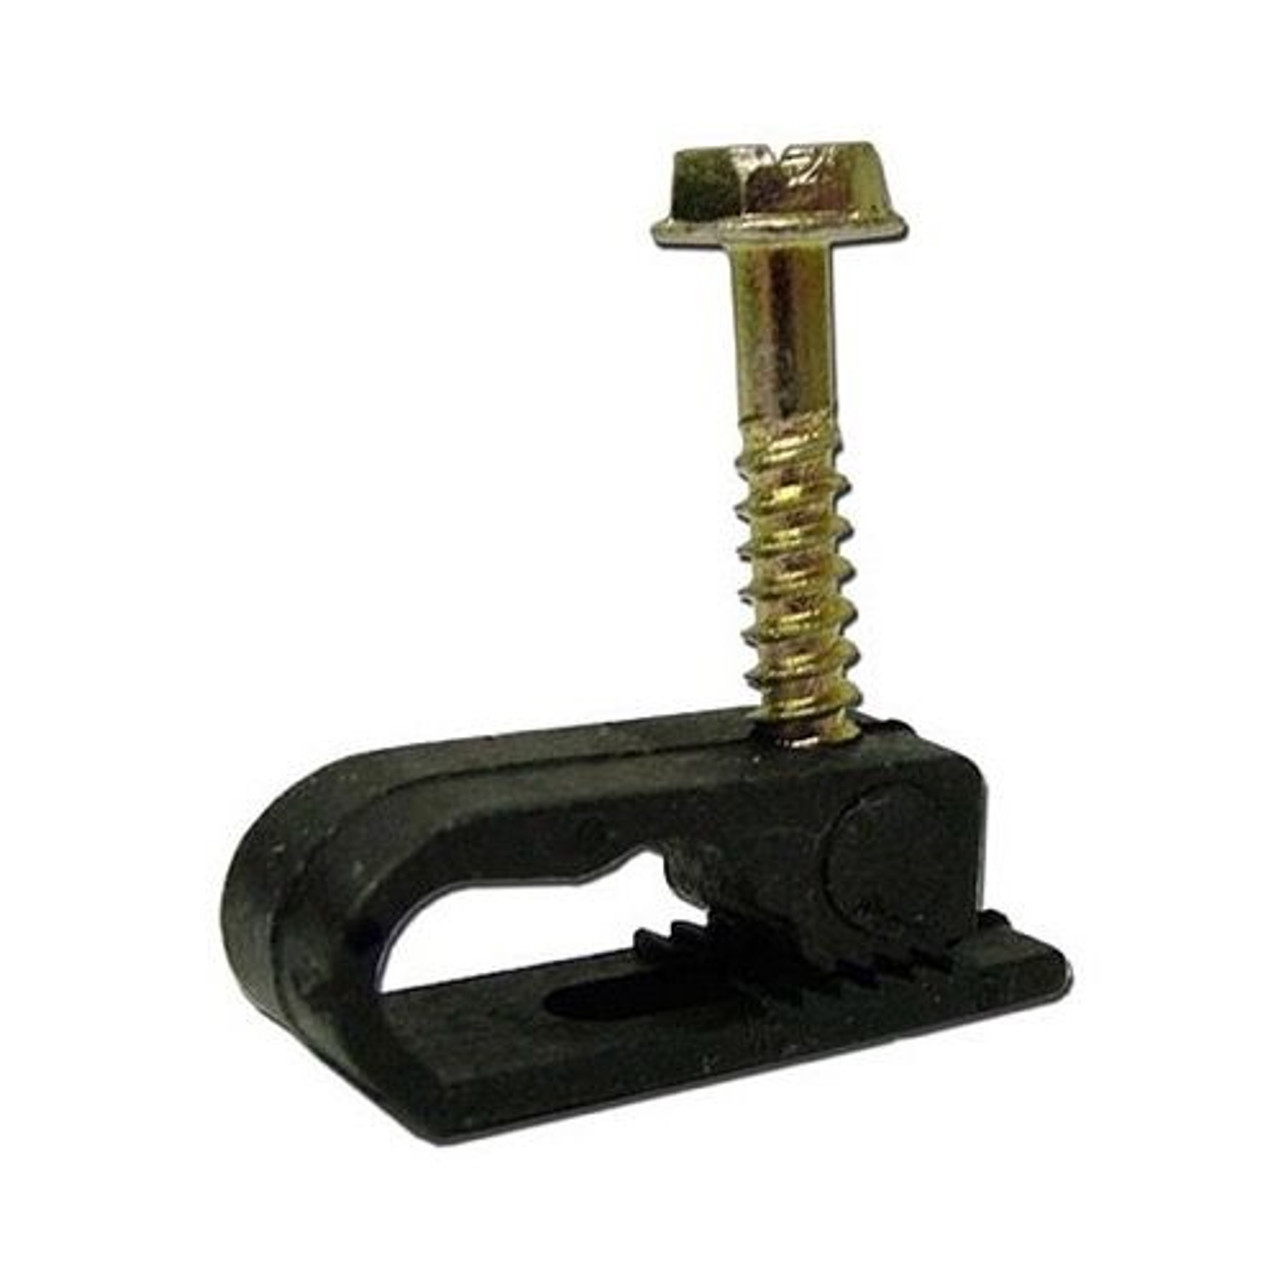 Eagle Flex Clip Dual Coaxial Cable Strap Fastener Clamp RG6 1/2" Screw In Holder Straps Digital Video Satellite HDTV Antenna RG-6 Signal Fasteners, Sold as Singles